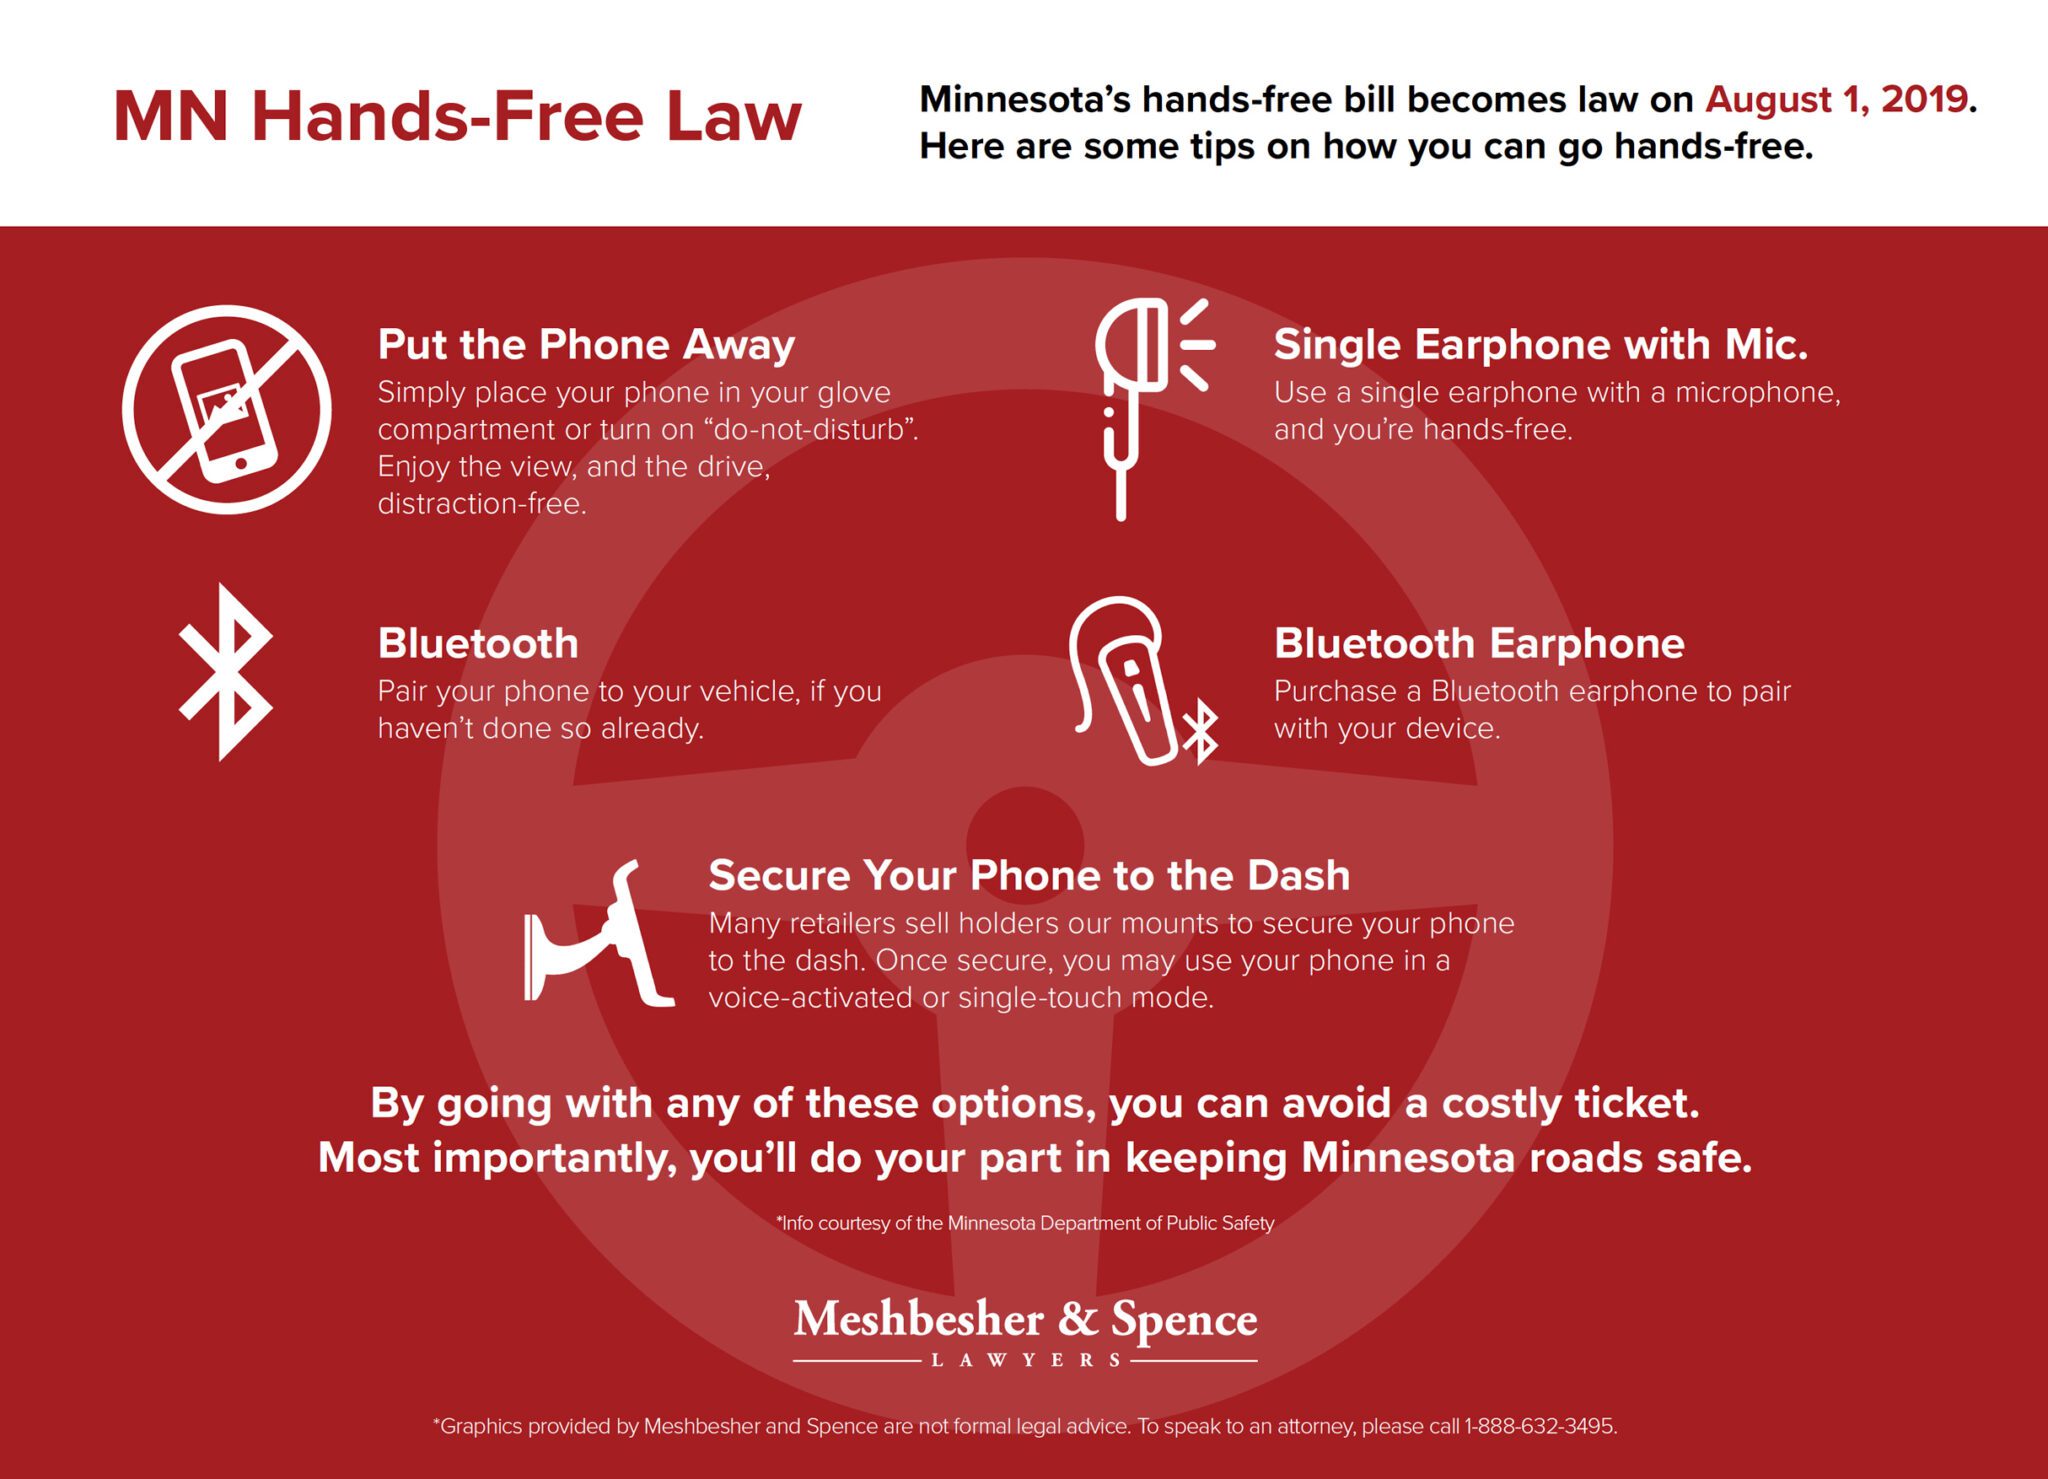 MN Hands-Free Law Facts